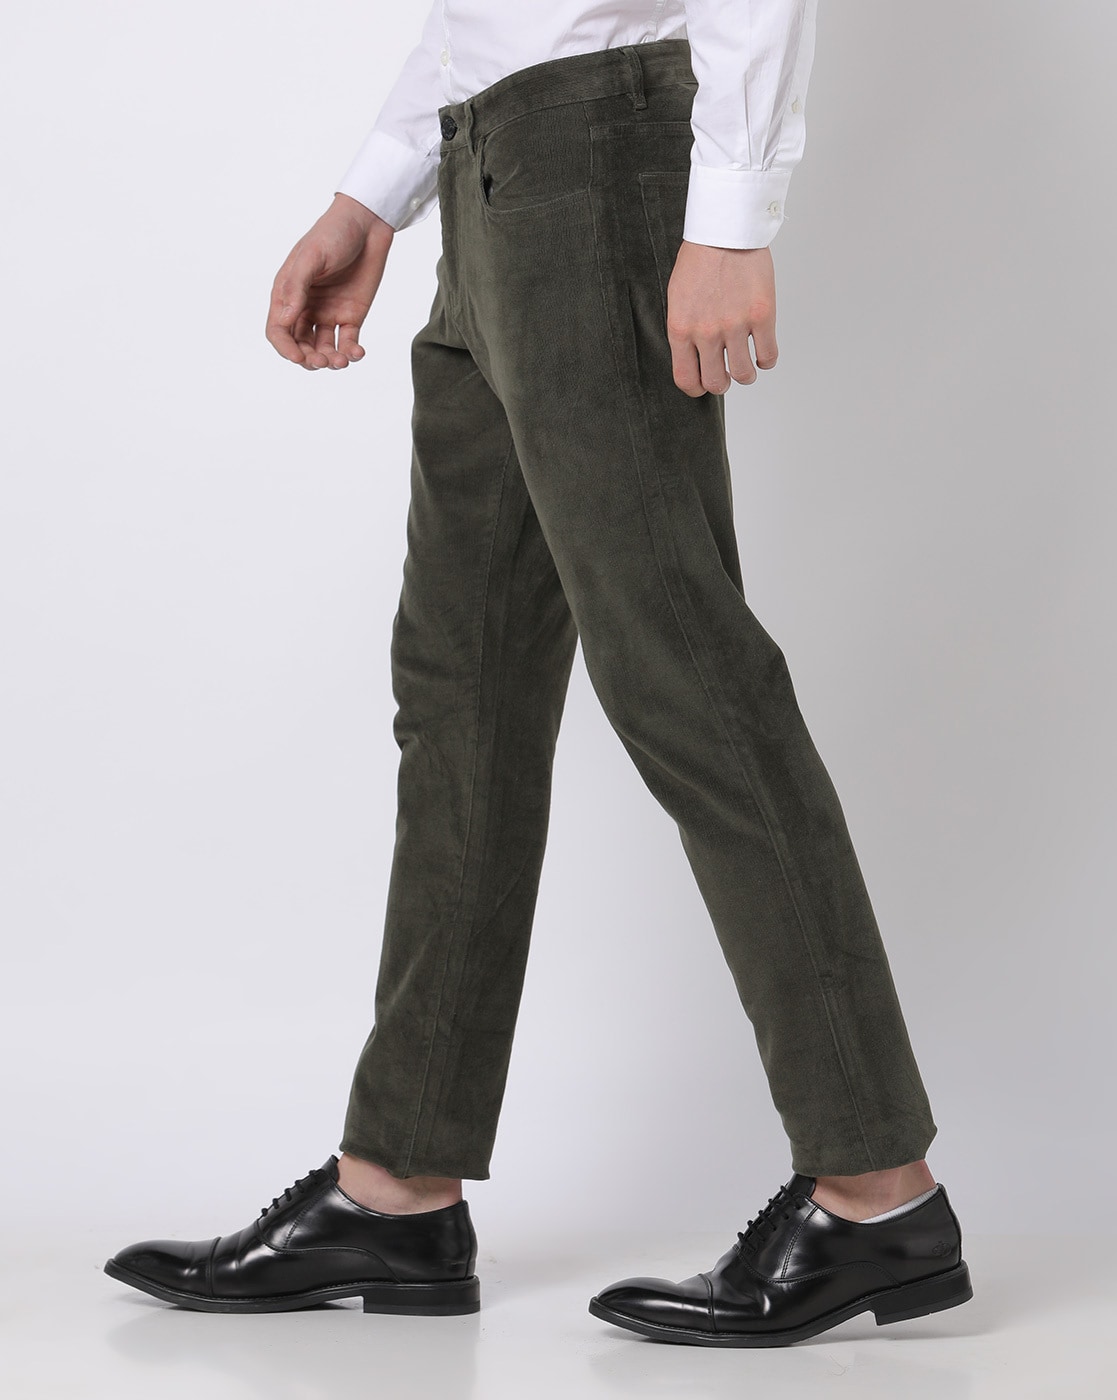 Buy Wrangler Olive Green Corduroy Trousers  Trousers for Men 1044666   Myntra